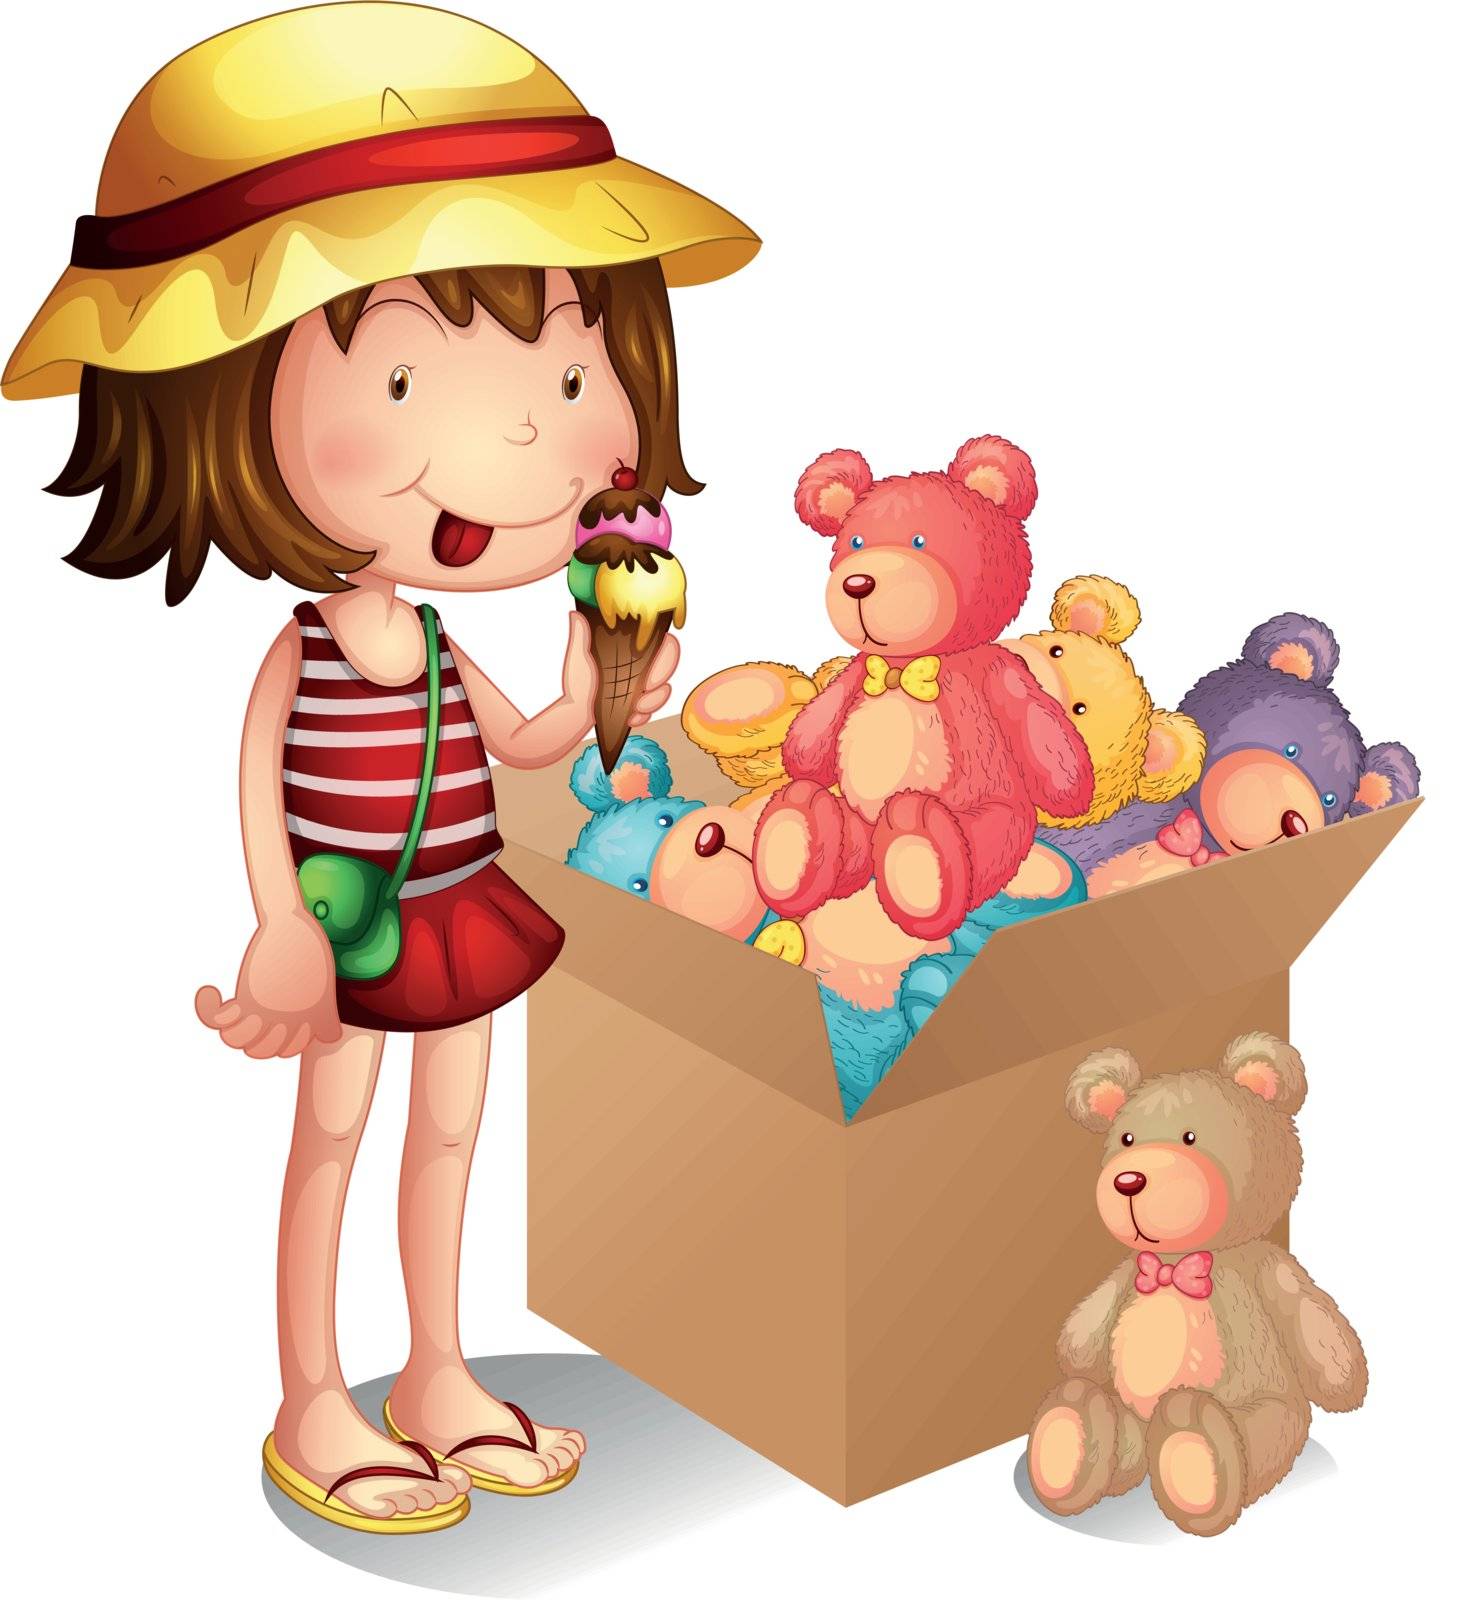 Illustration of a young girl beside a box of toys on a white background